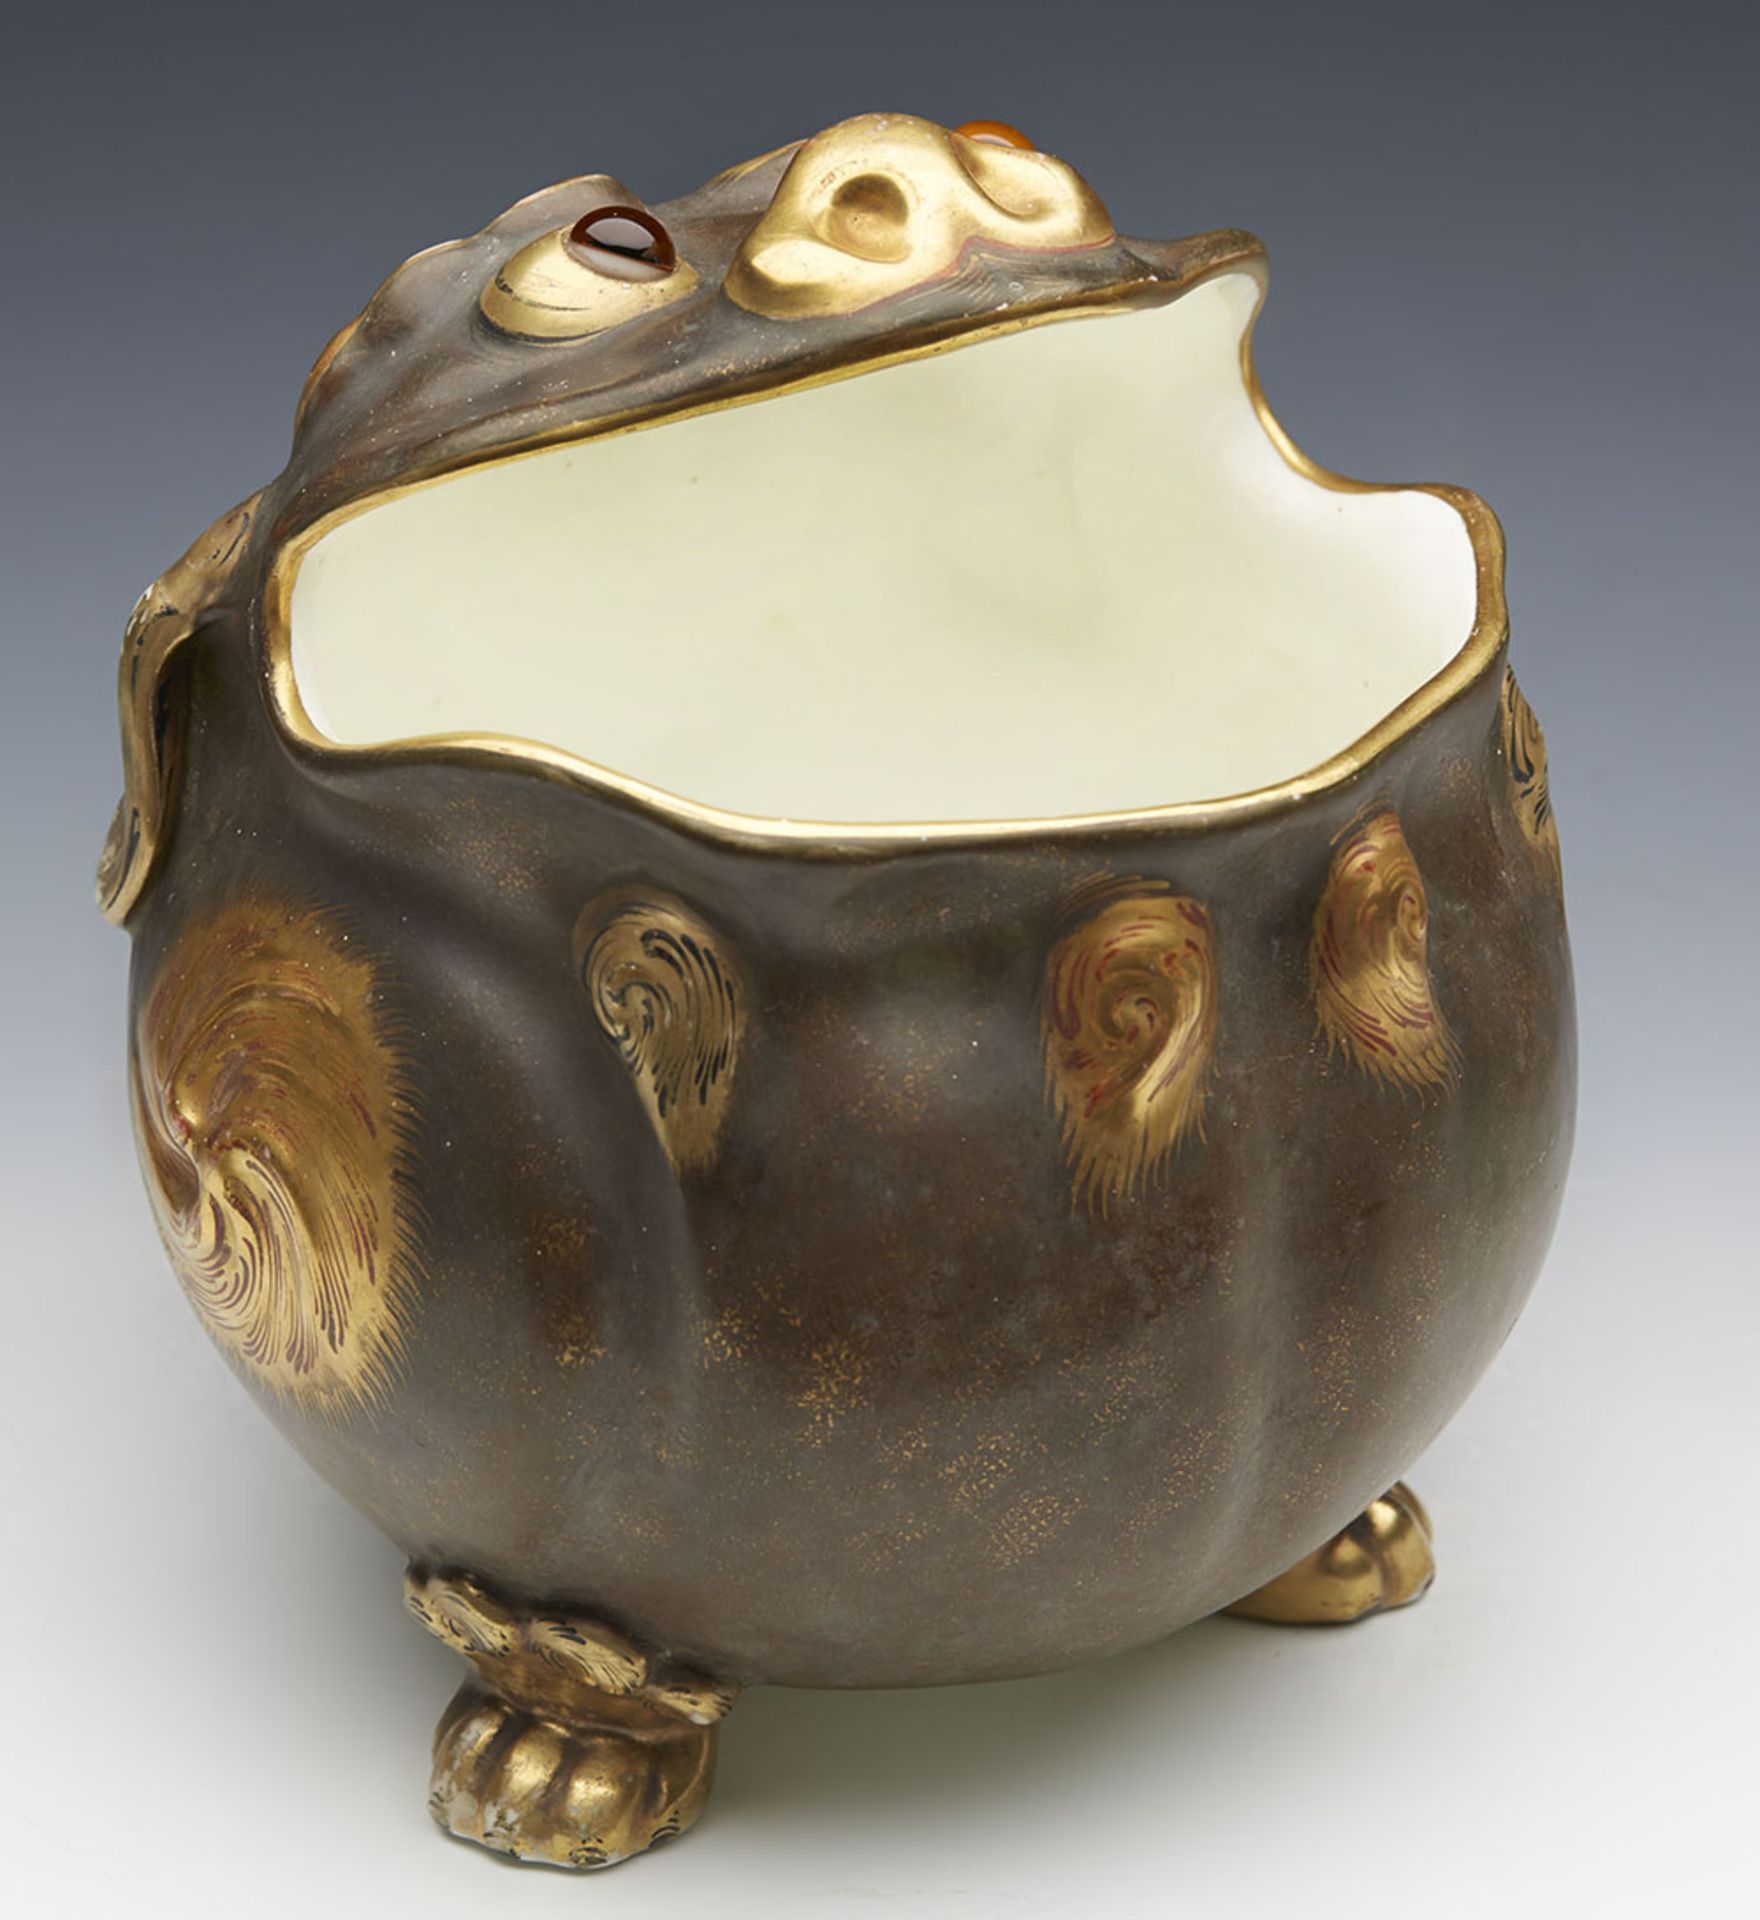 ANTIQUE MOORE BROTHERS GROTESQUE BRONZED FROG VASE C.1880 - Image 10 of 10